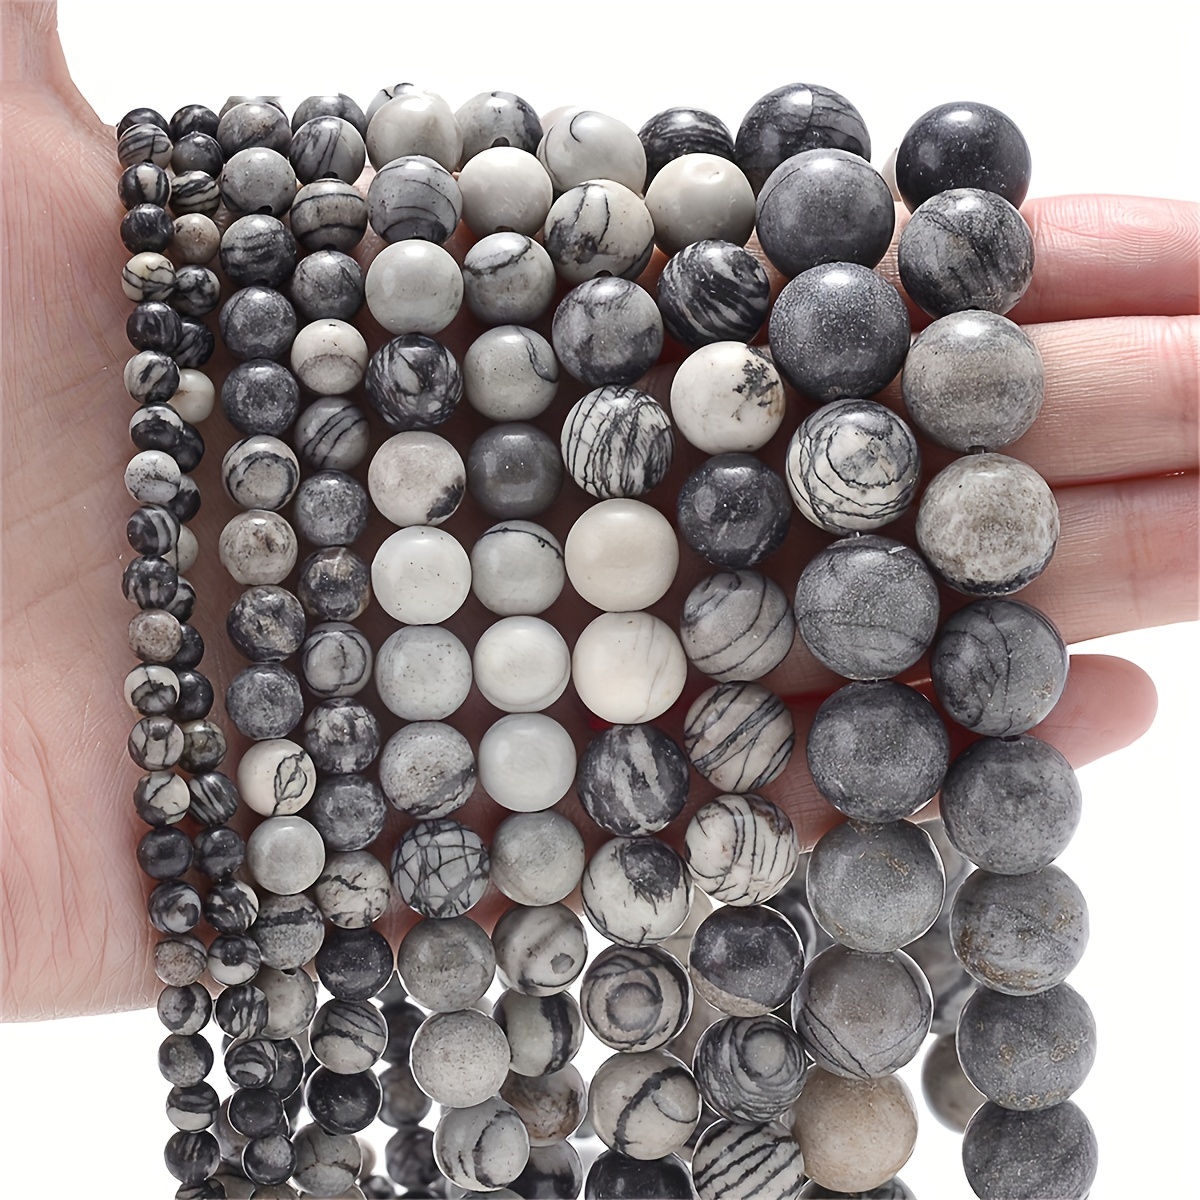 1 Strand Natural Stone Black White Lava Volcanic Gemstones Beads ,Round  Loose Beads For Jewelry Making, DIY Bracelets Necklace Accessories